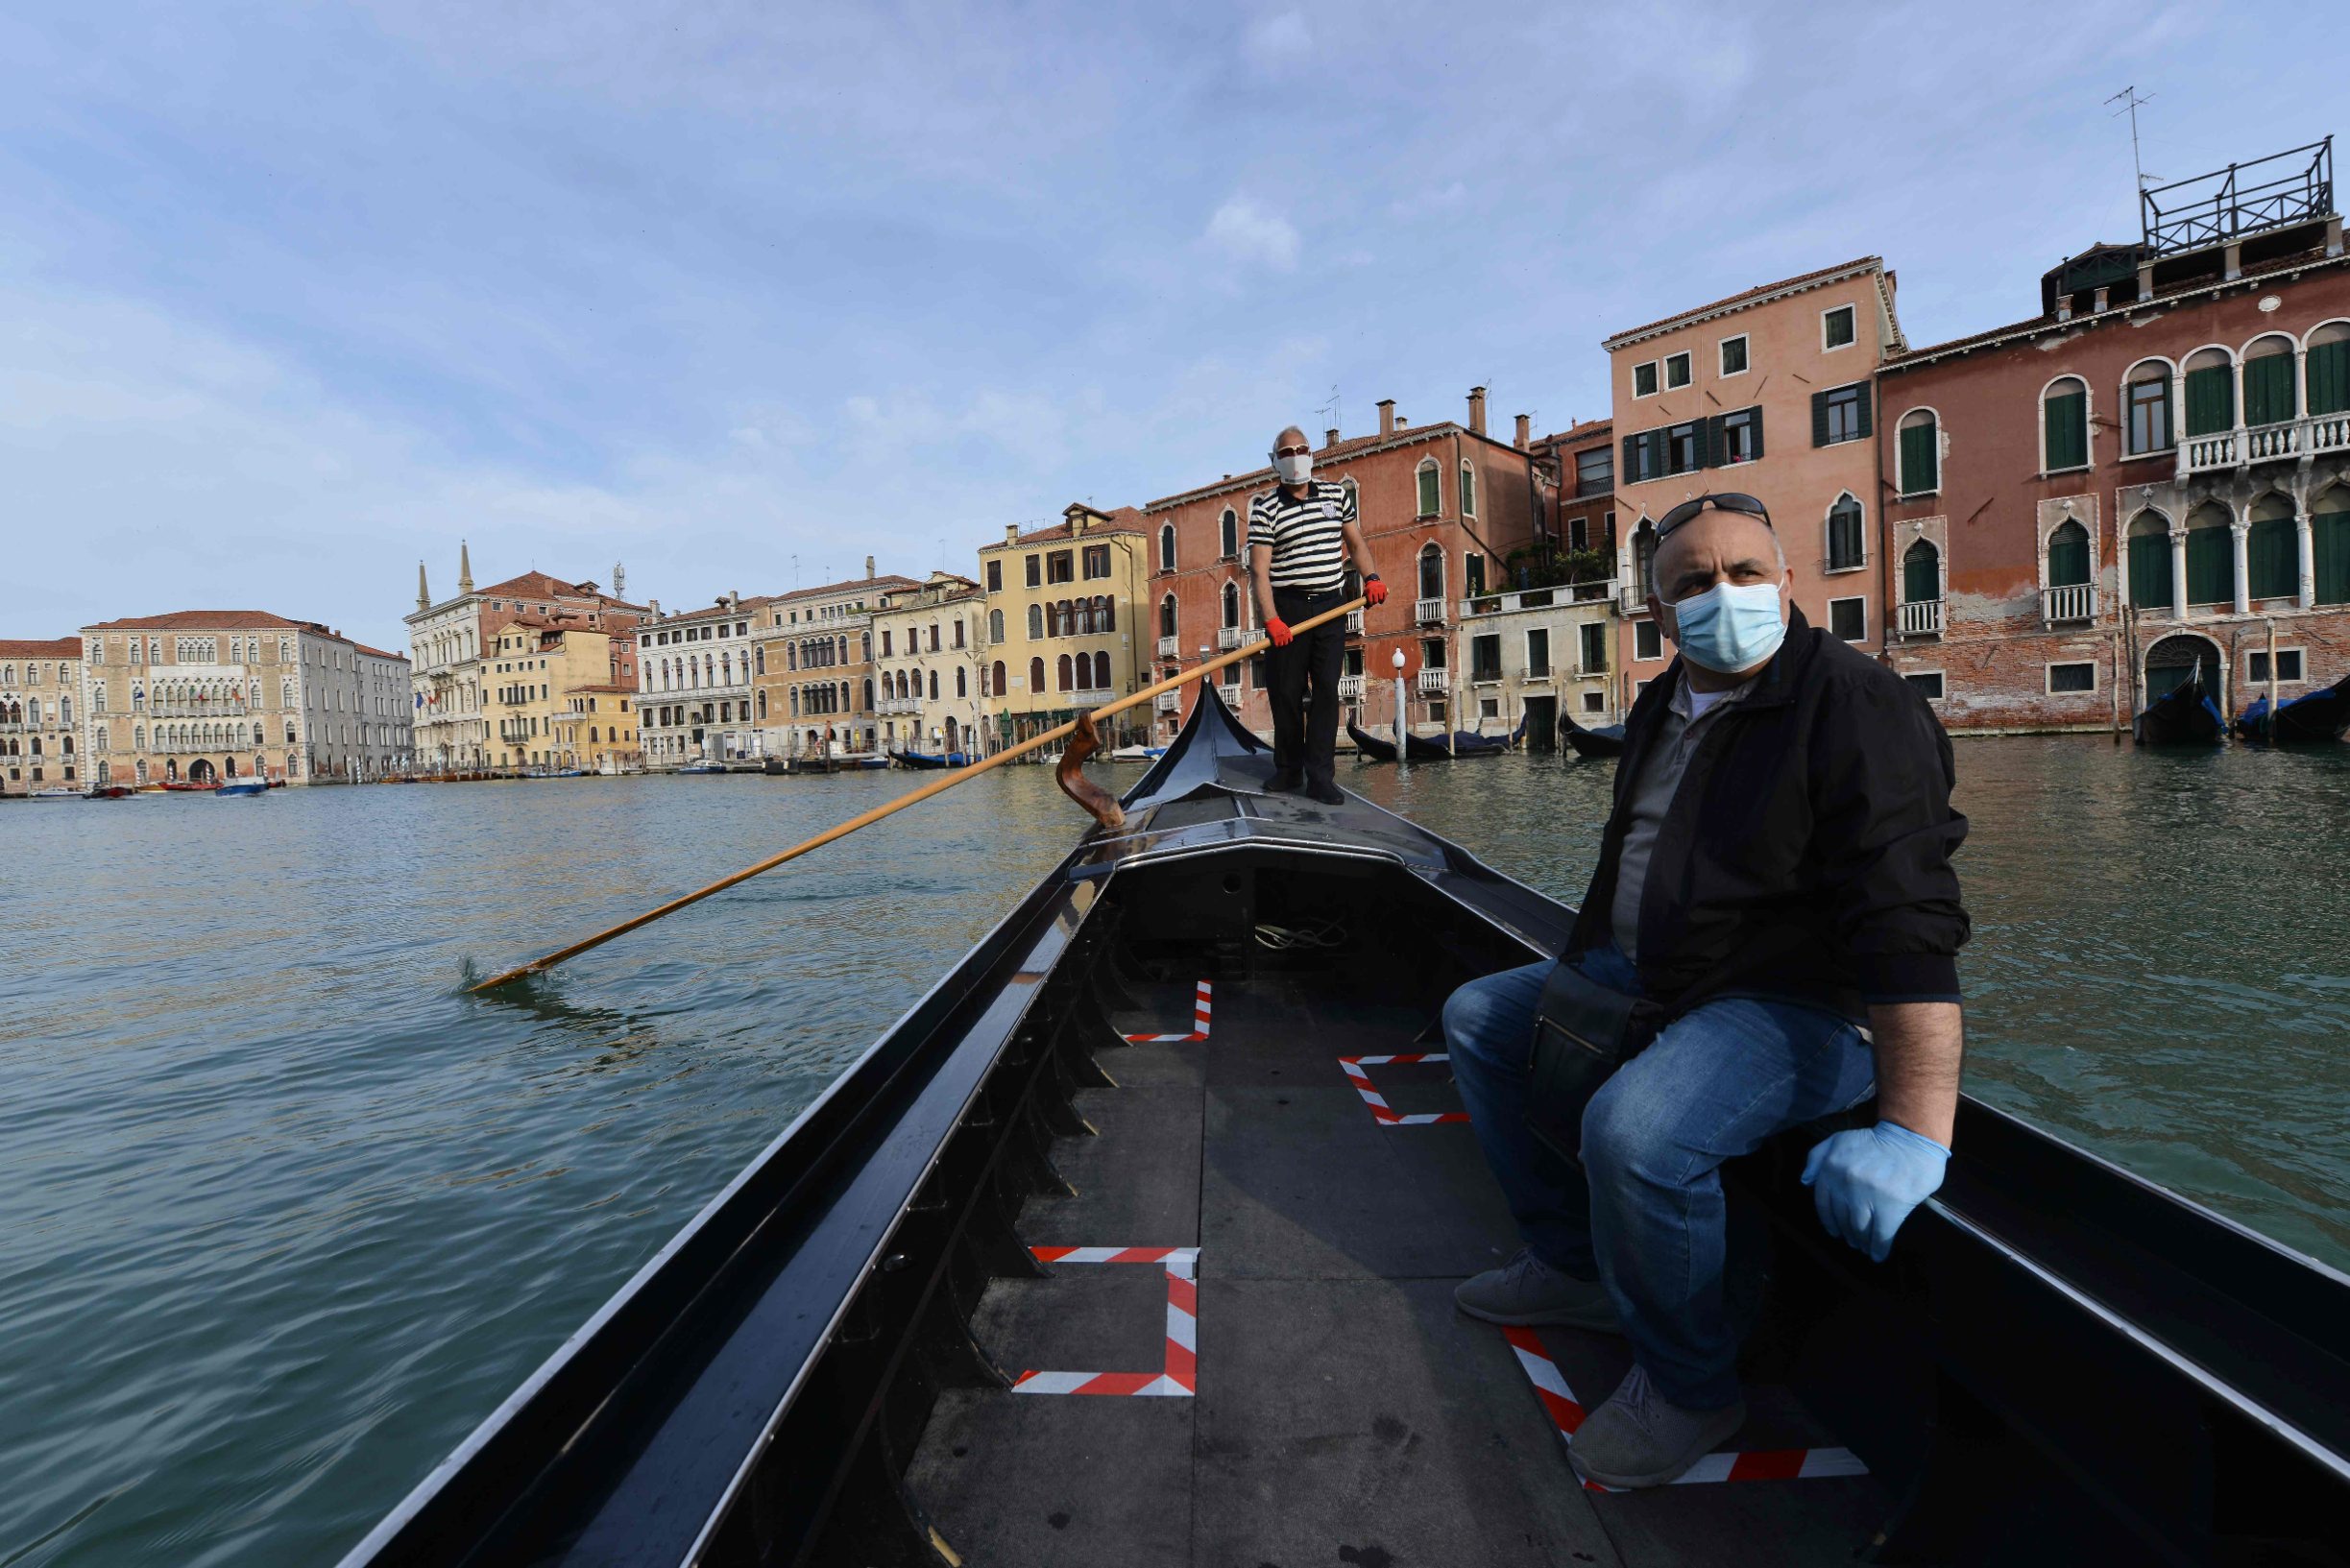 TOPSHOT - A gondolier wearing a face mask (Rear) transports his very first customer as service resumes at the San Toma embankment on a Venice canal on May 18, 2020 during the country's lockdown aimed at curbing the spread of the COVID-19 infection, caused by the novel coronavirus. - Restaurants and churches reopen in Italy on May 18, 2020 as part of a fresh wave of lockdown easing in Europe and the country's latest step in a cautious, gradual return to normality, allowing businesses and churches to reopen after a two-month lockdown. (Photo by ANDREA PATTARO / AFP)